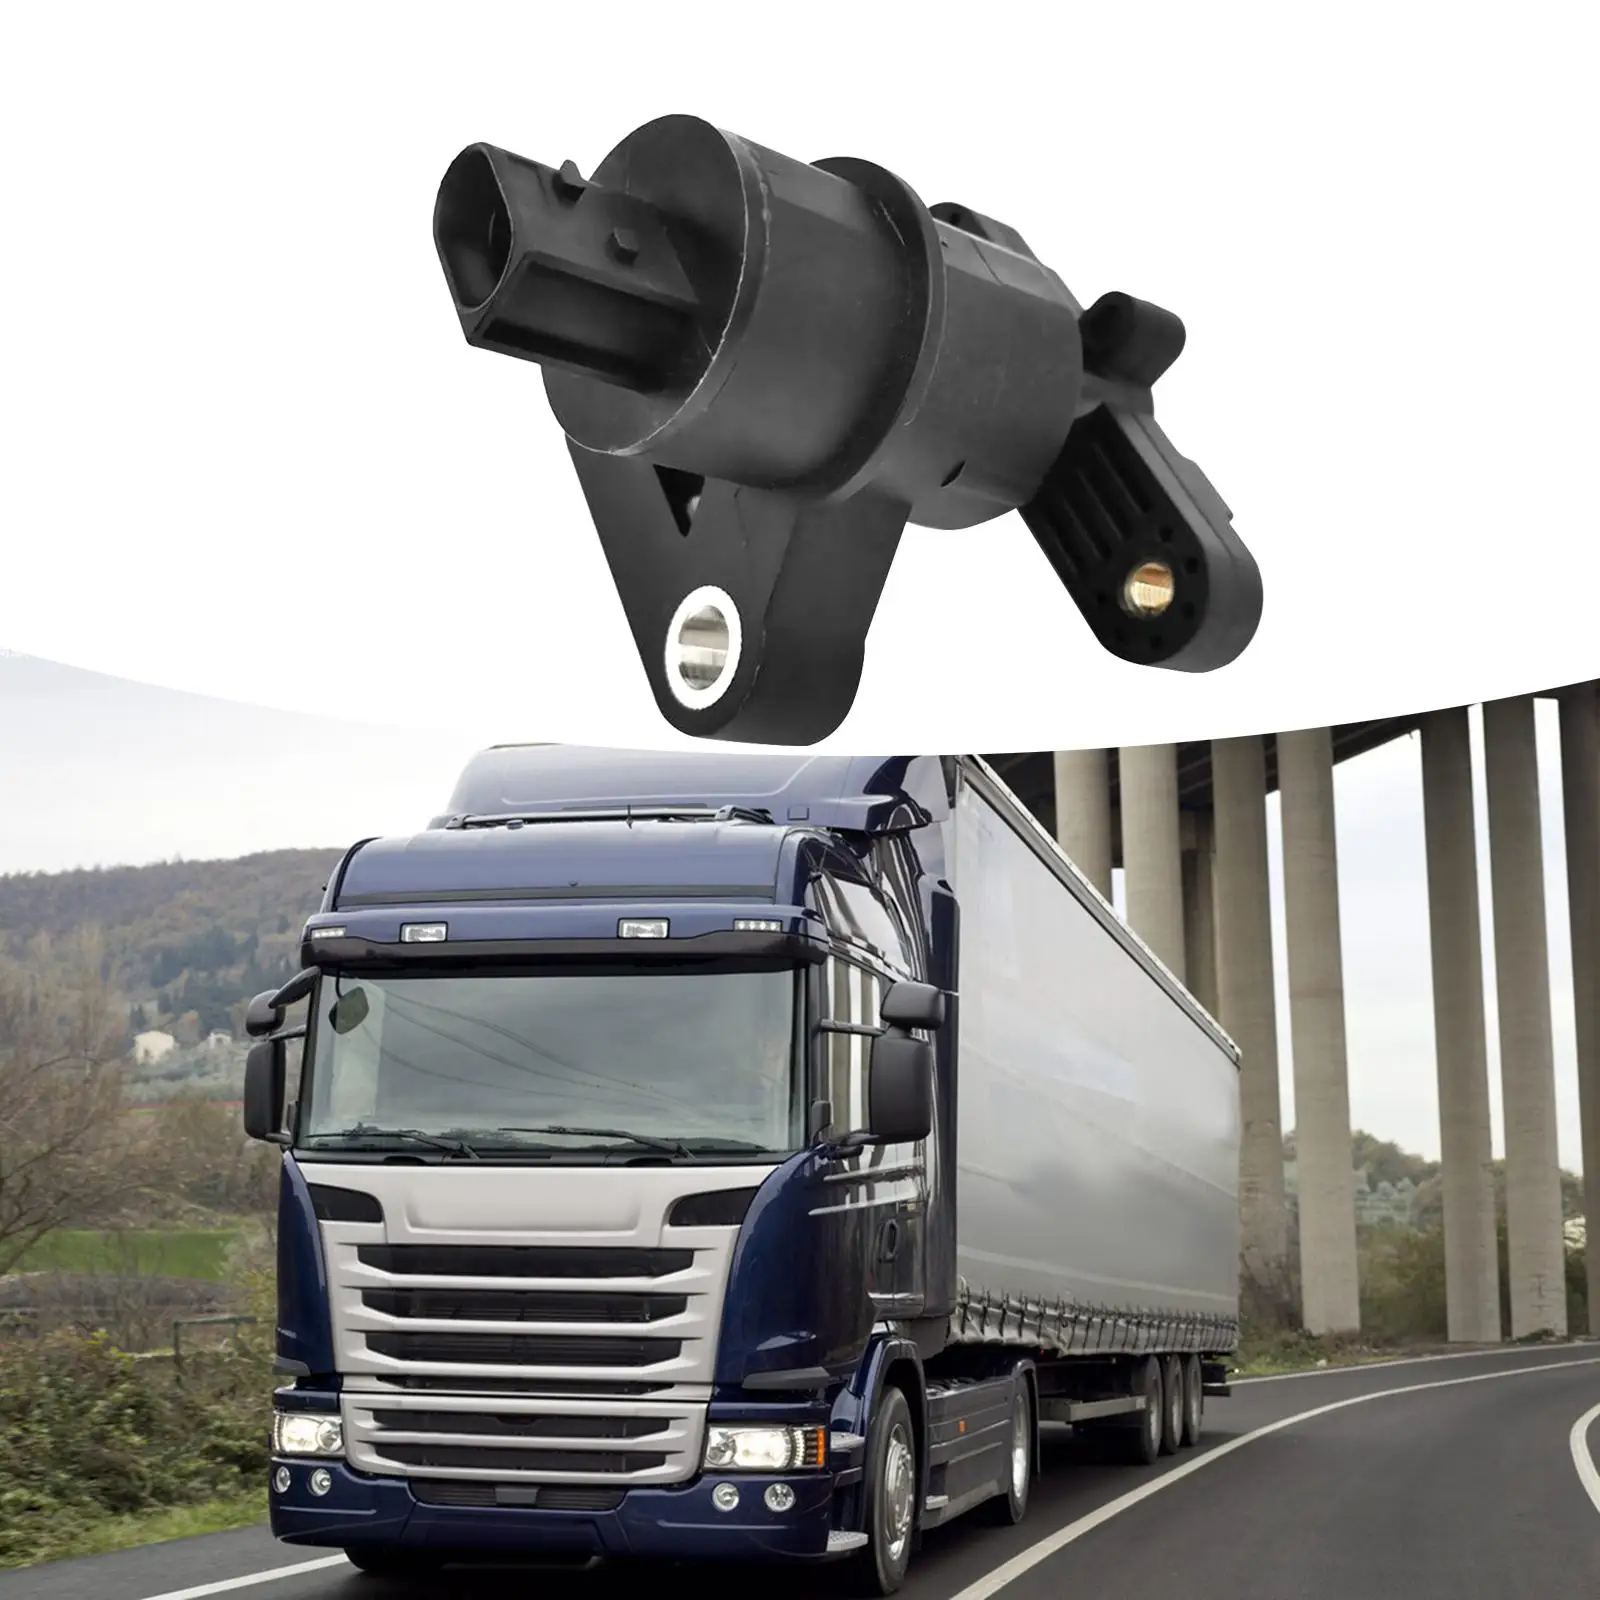 Air Suspension Height Level Sensor 1889797 Professional Parts Easily Install Vehicle Replace Parts for Scania Truck S4 S5